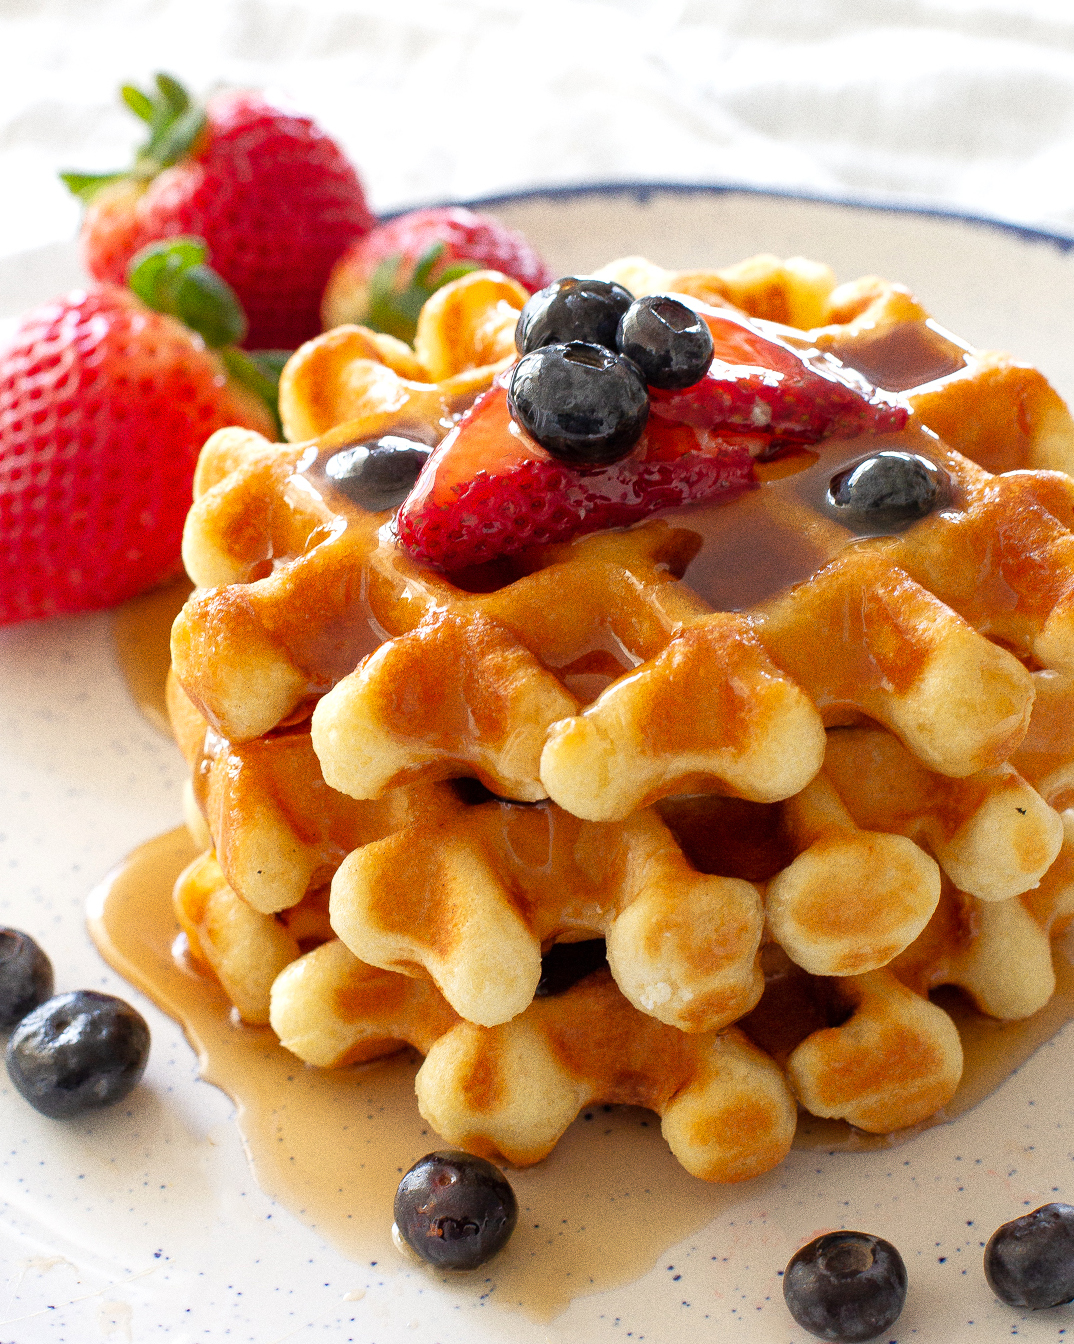 stack of waffles with strawberries and blueberries